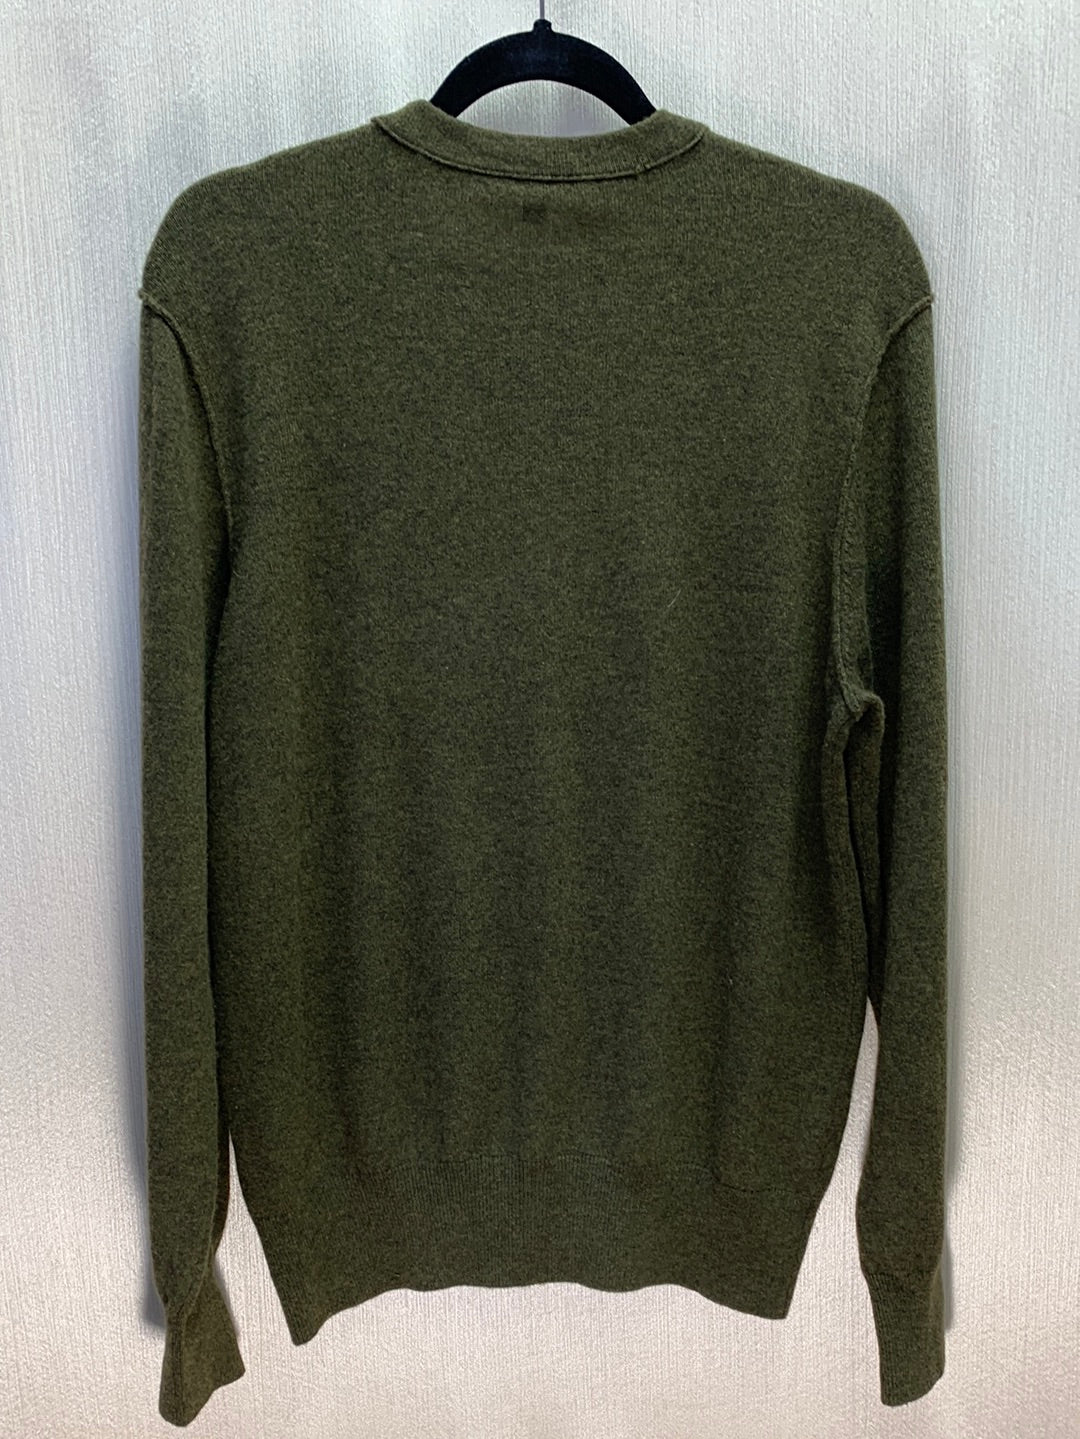 SAKS FIFTH AVENUE brown green Heathered / Marled Cashmere Sweater - L